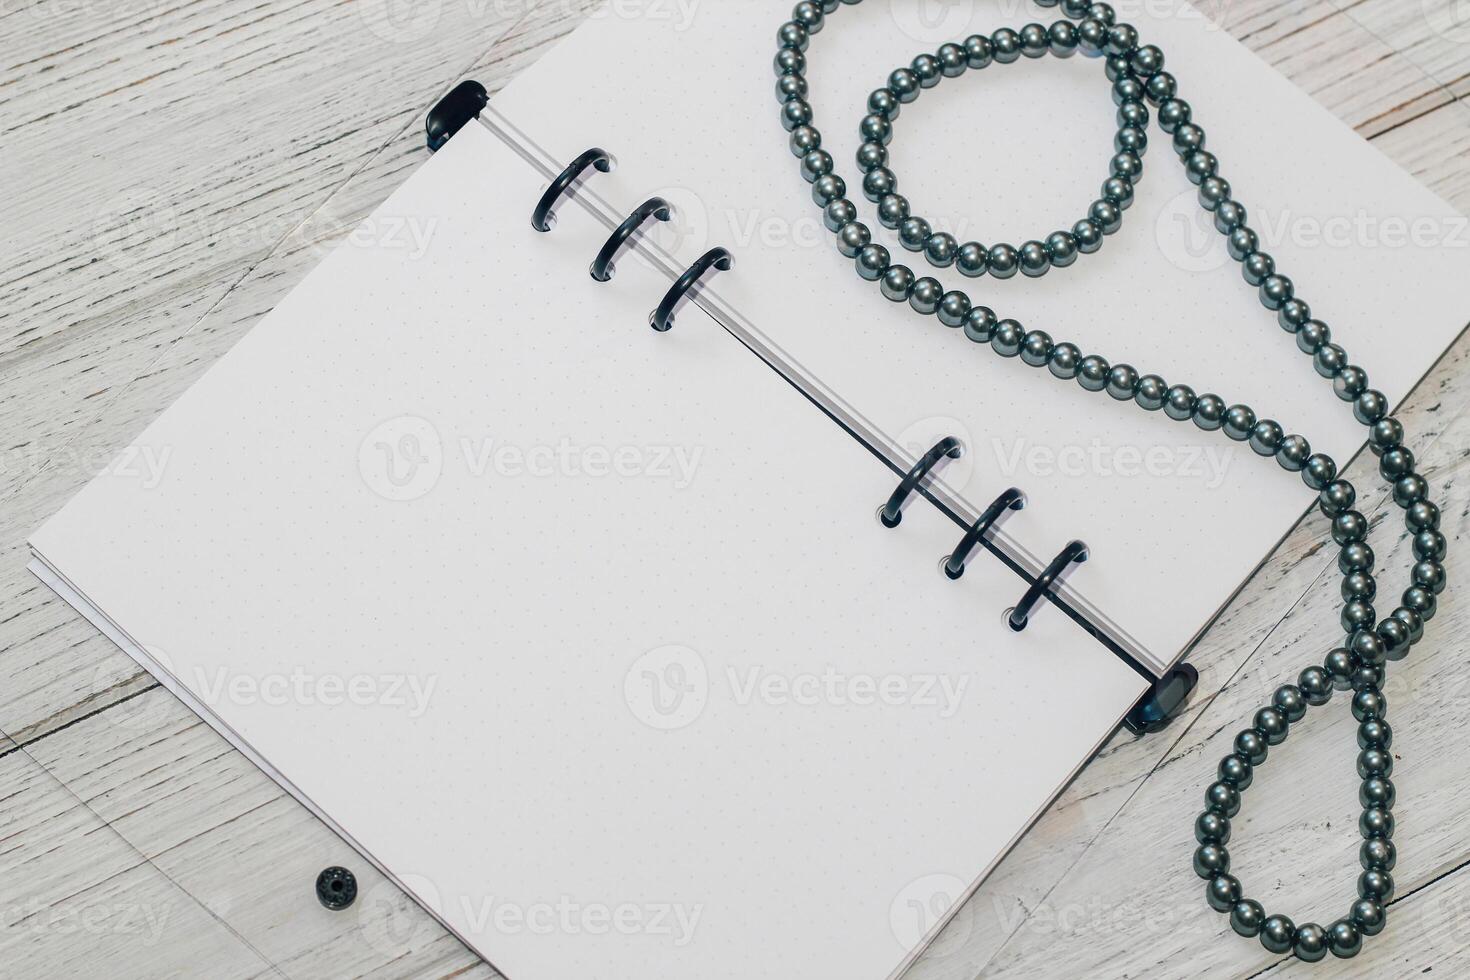 Notebook with rings, checkered sheets, transparent cover, beads, style concept photo